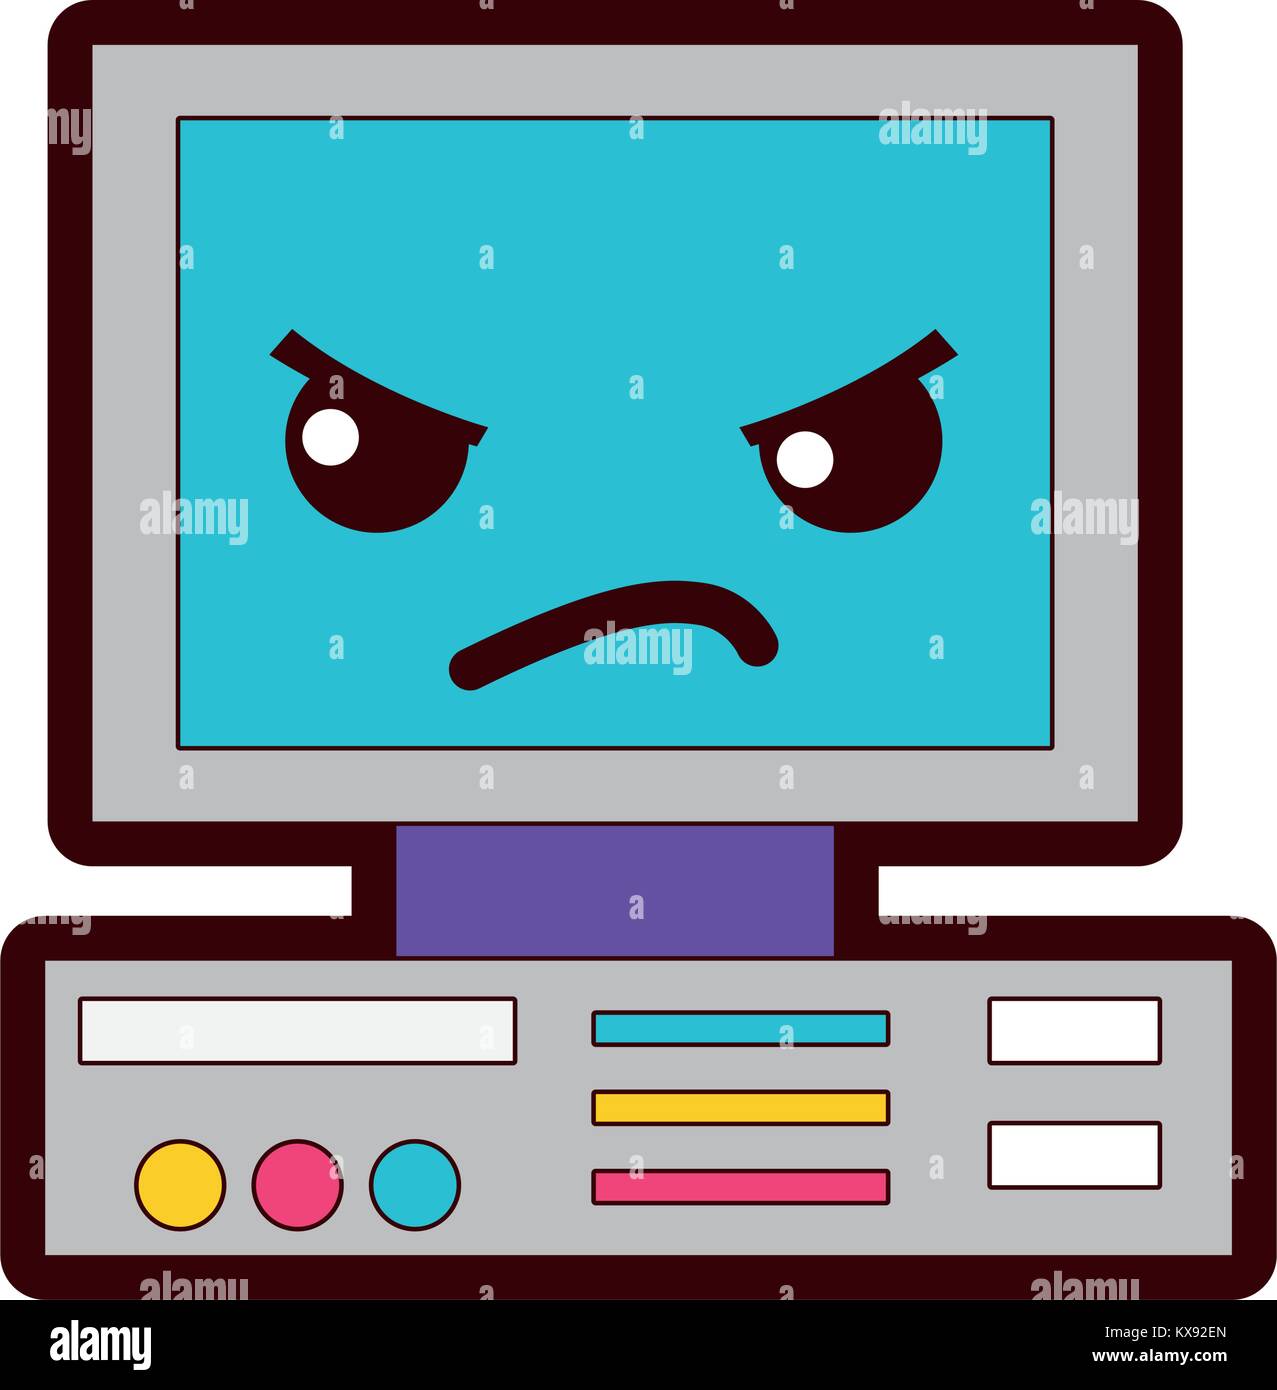 full color angry and cute computer technology kawaii Stock Vector Image ...